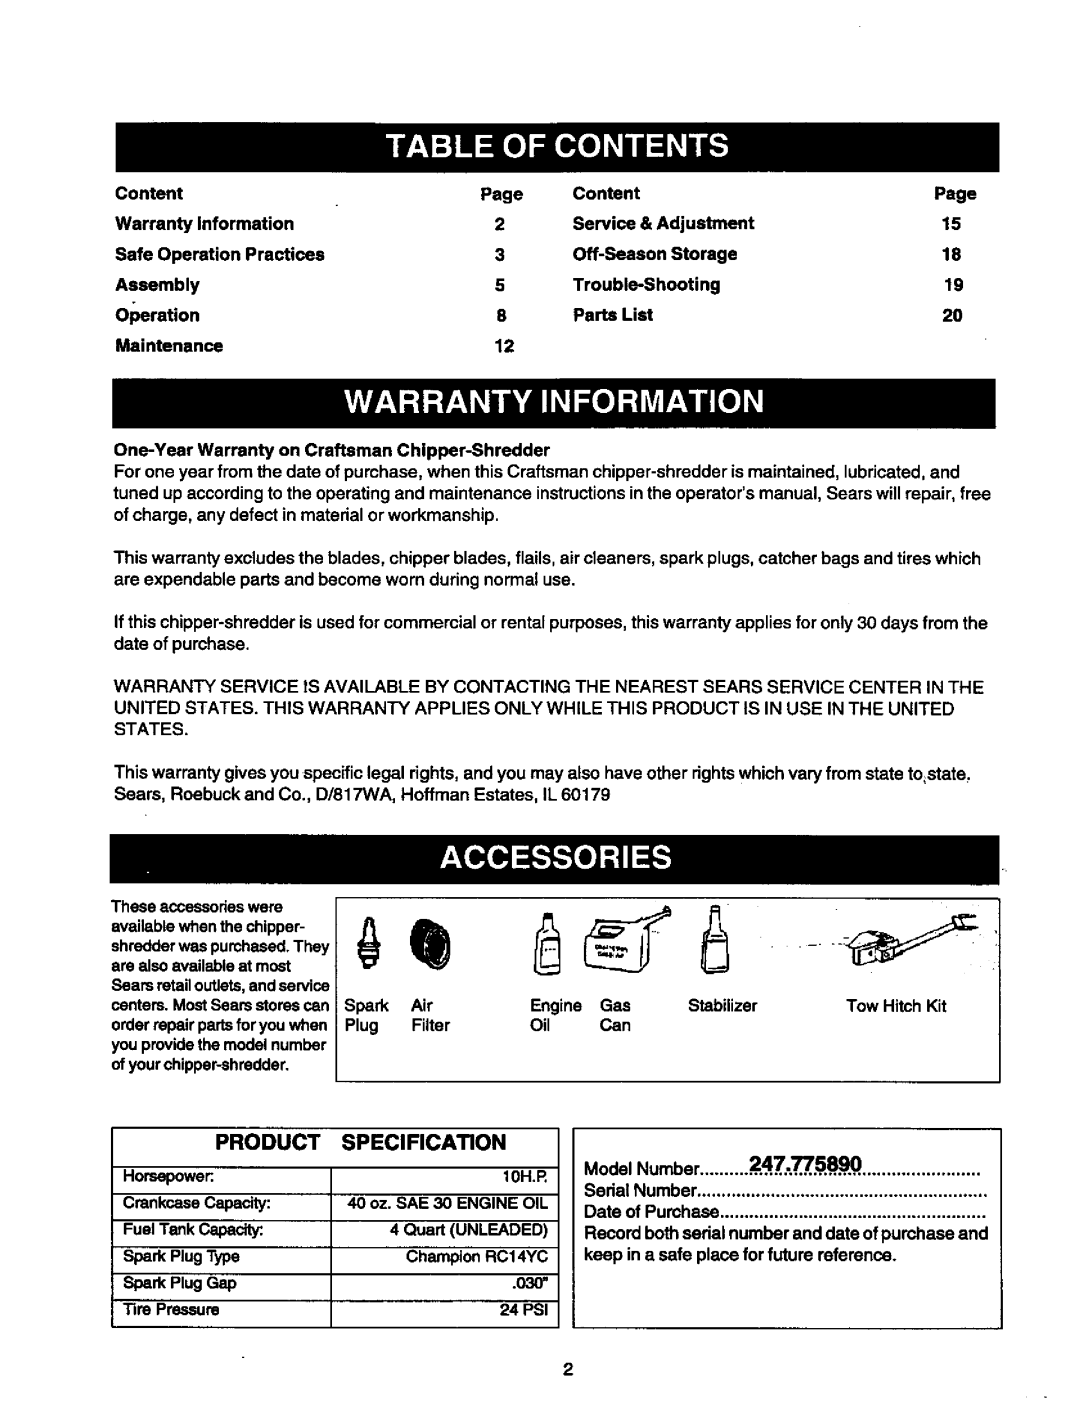 Craftsman 247.775890 manual Product, Specification 